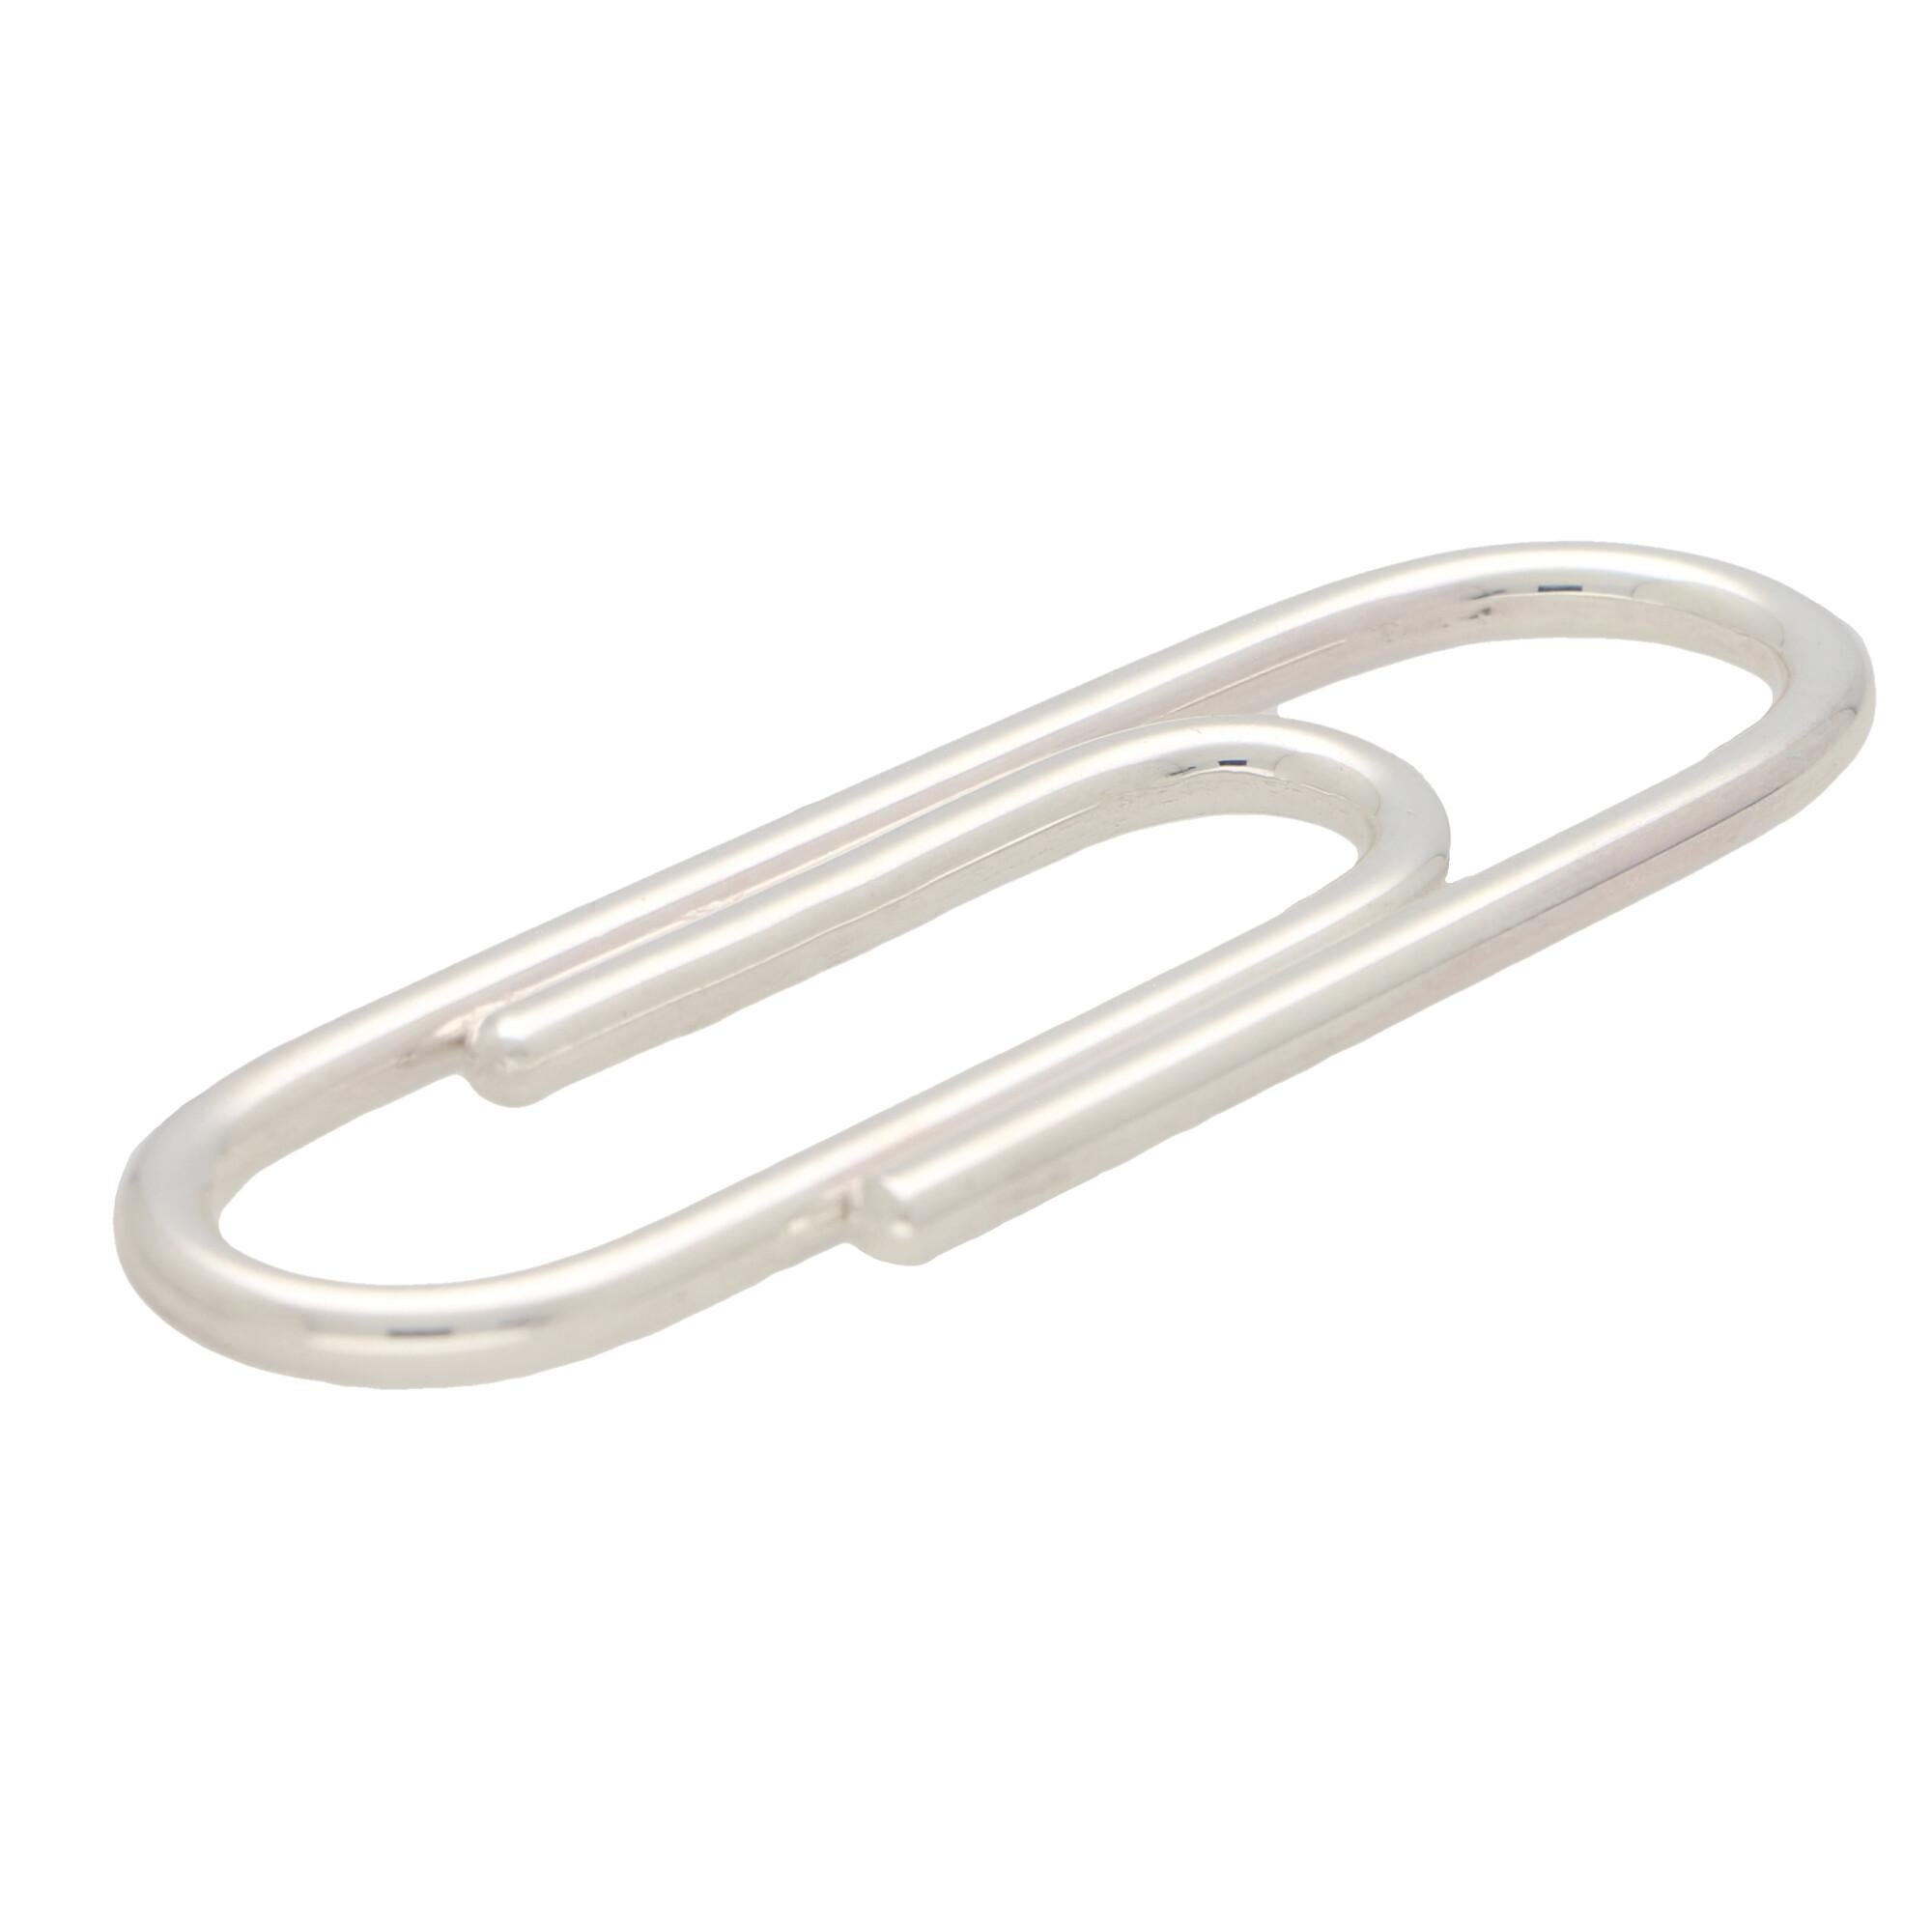 A minimalistic paperclip style money clip made of solid British sterling silver.

The clip measures 6.4 x 2 centimetres and there is a gross weight of 13.2 grams.